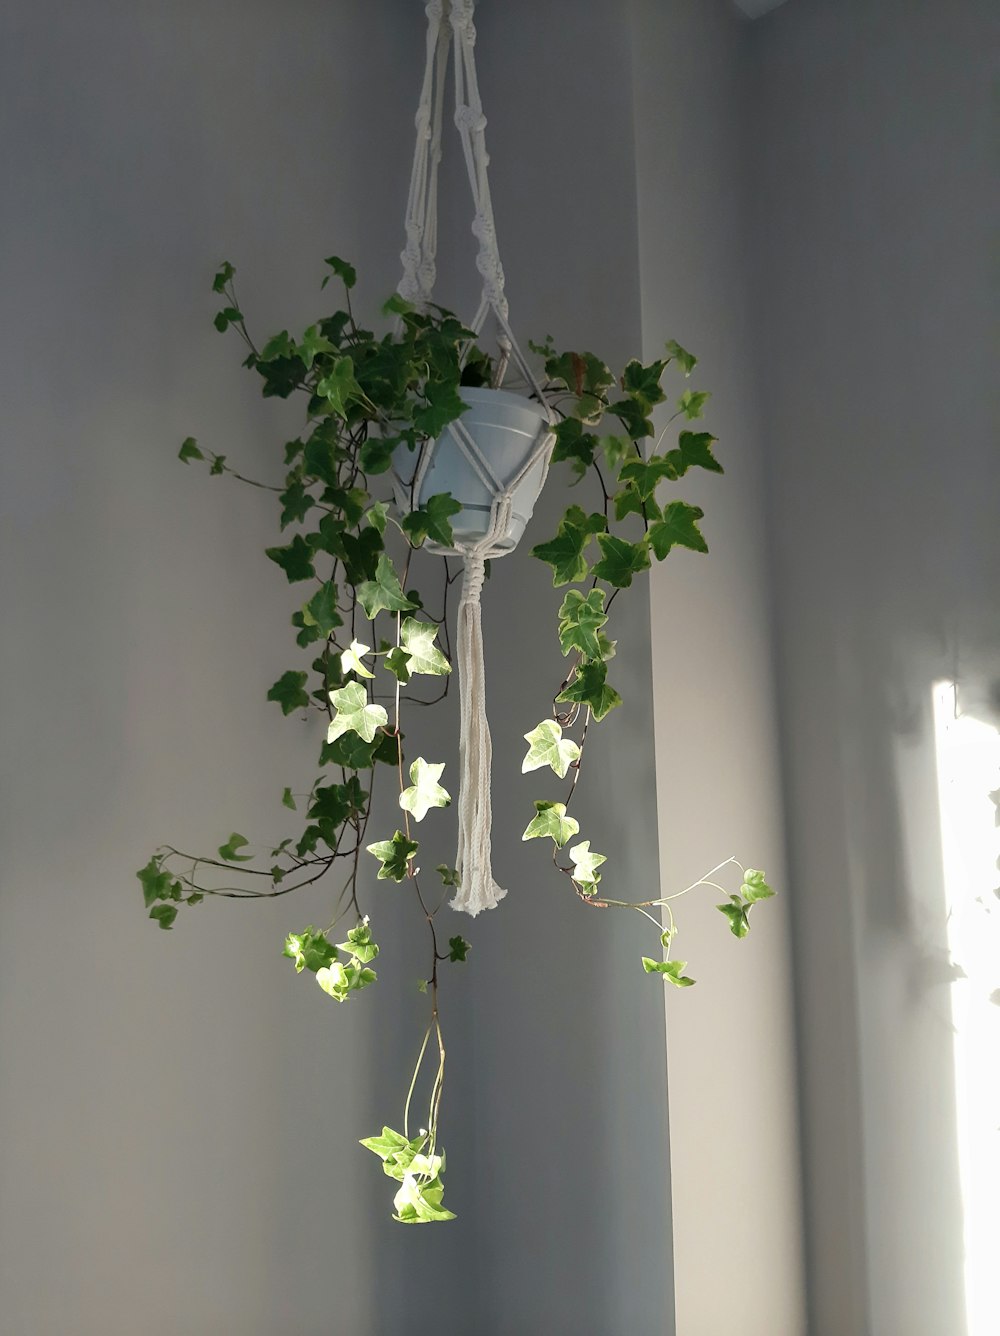 a plant hanging from a ceiling in a room